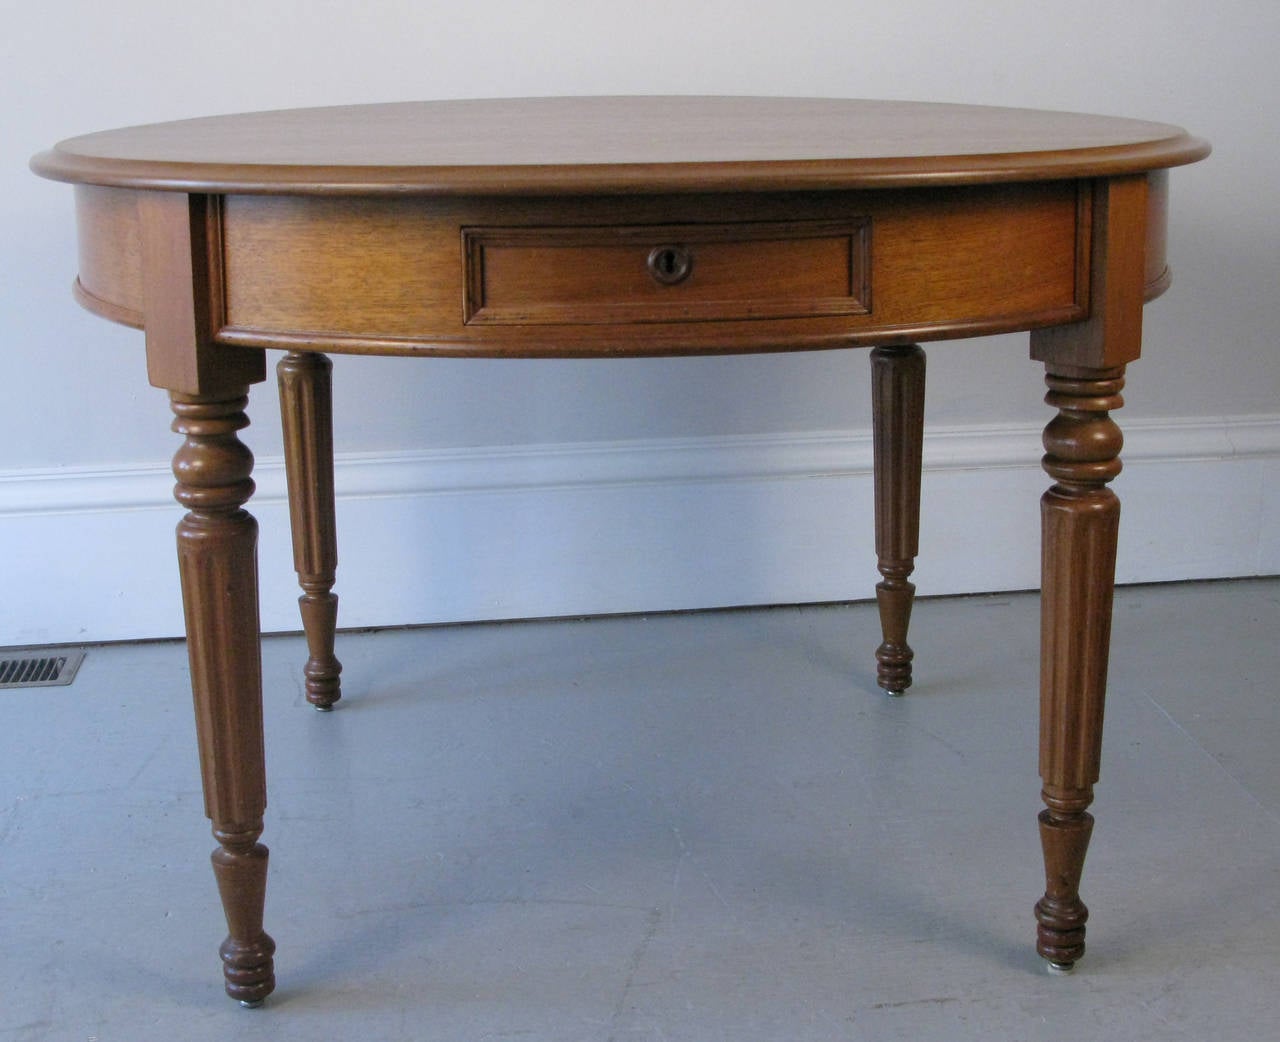 A very handsome and gutsy round walnut table from the Southern United States. The 1870s table has a very English William IV look to it and has a nice deep drawer. The table could be used for dining or center hall with it's 45